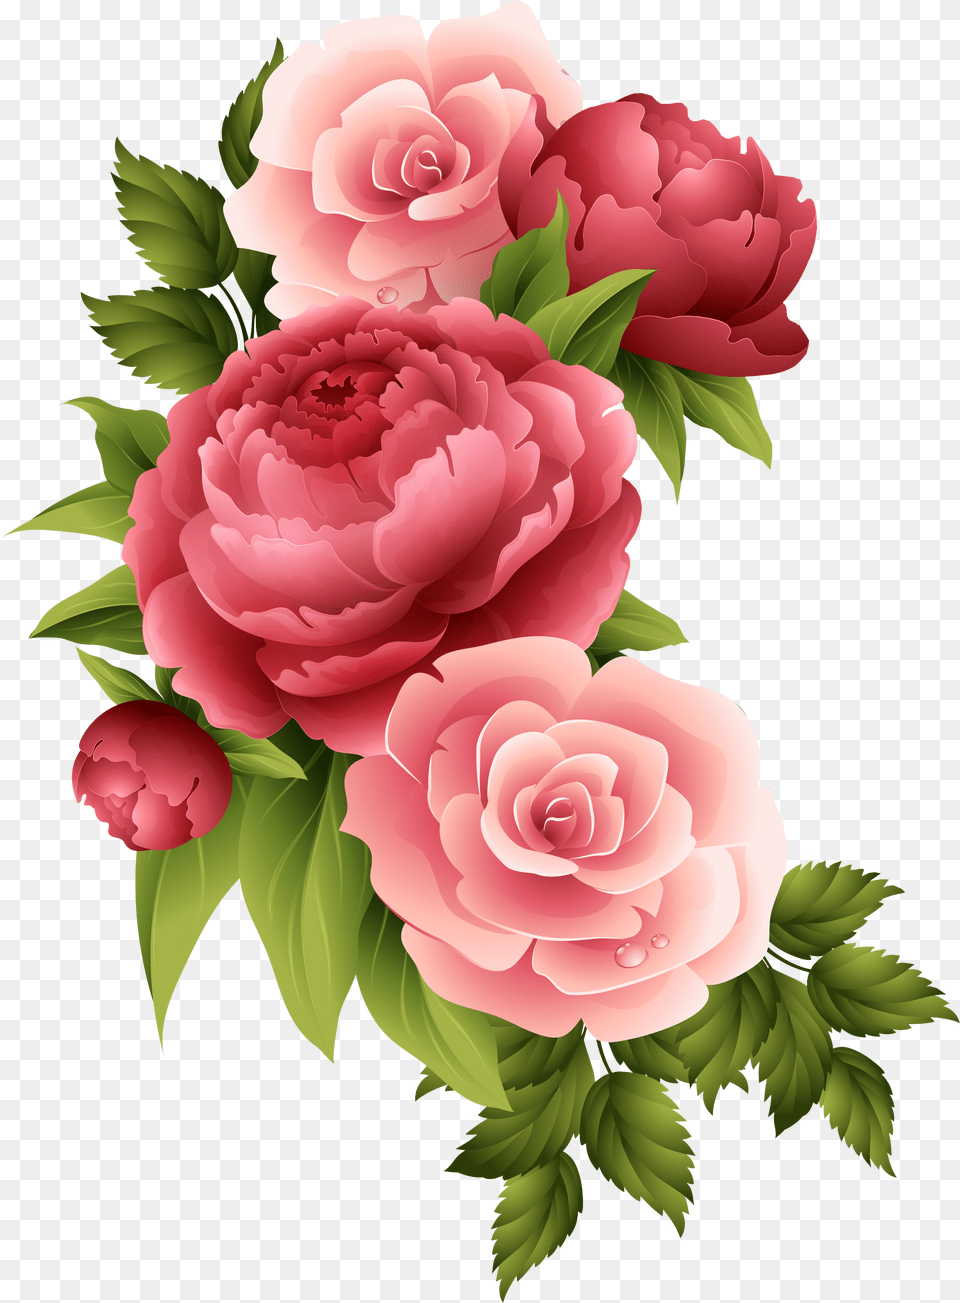 Free Vector Flower Invitation, Plant, Rose, Carnation, Peony Png